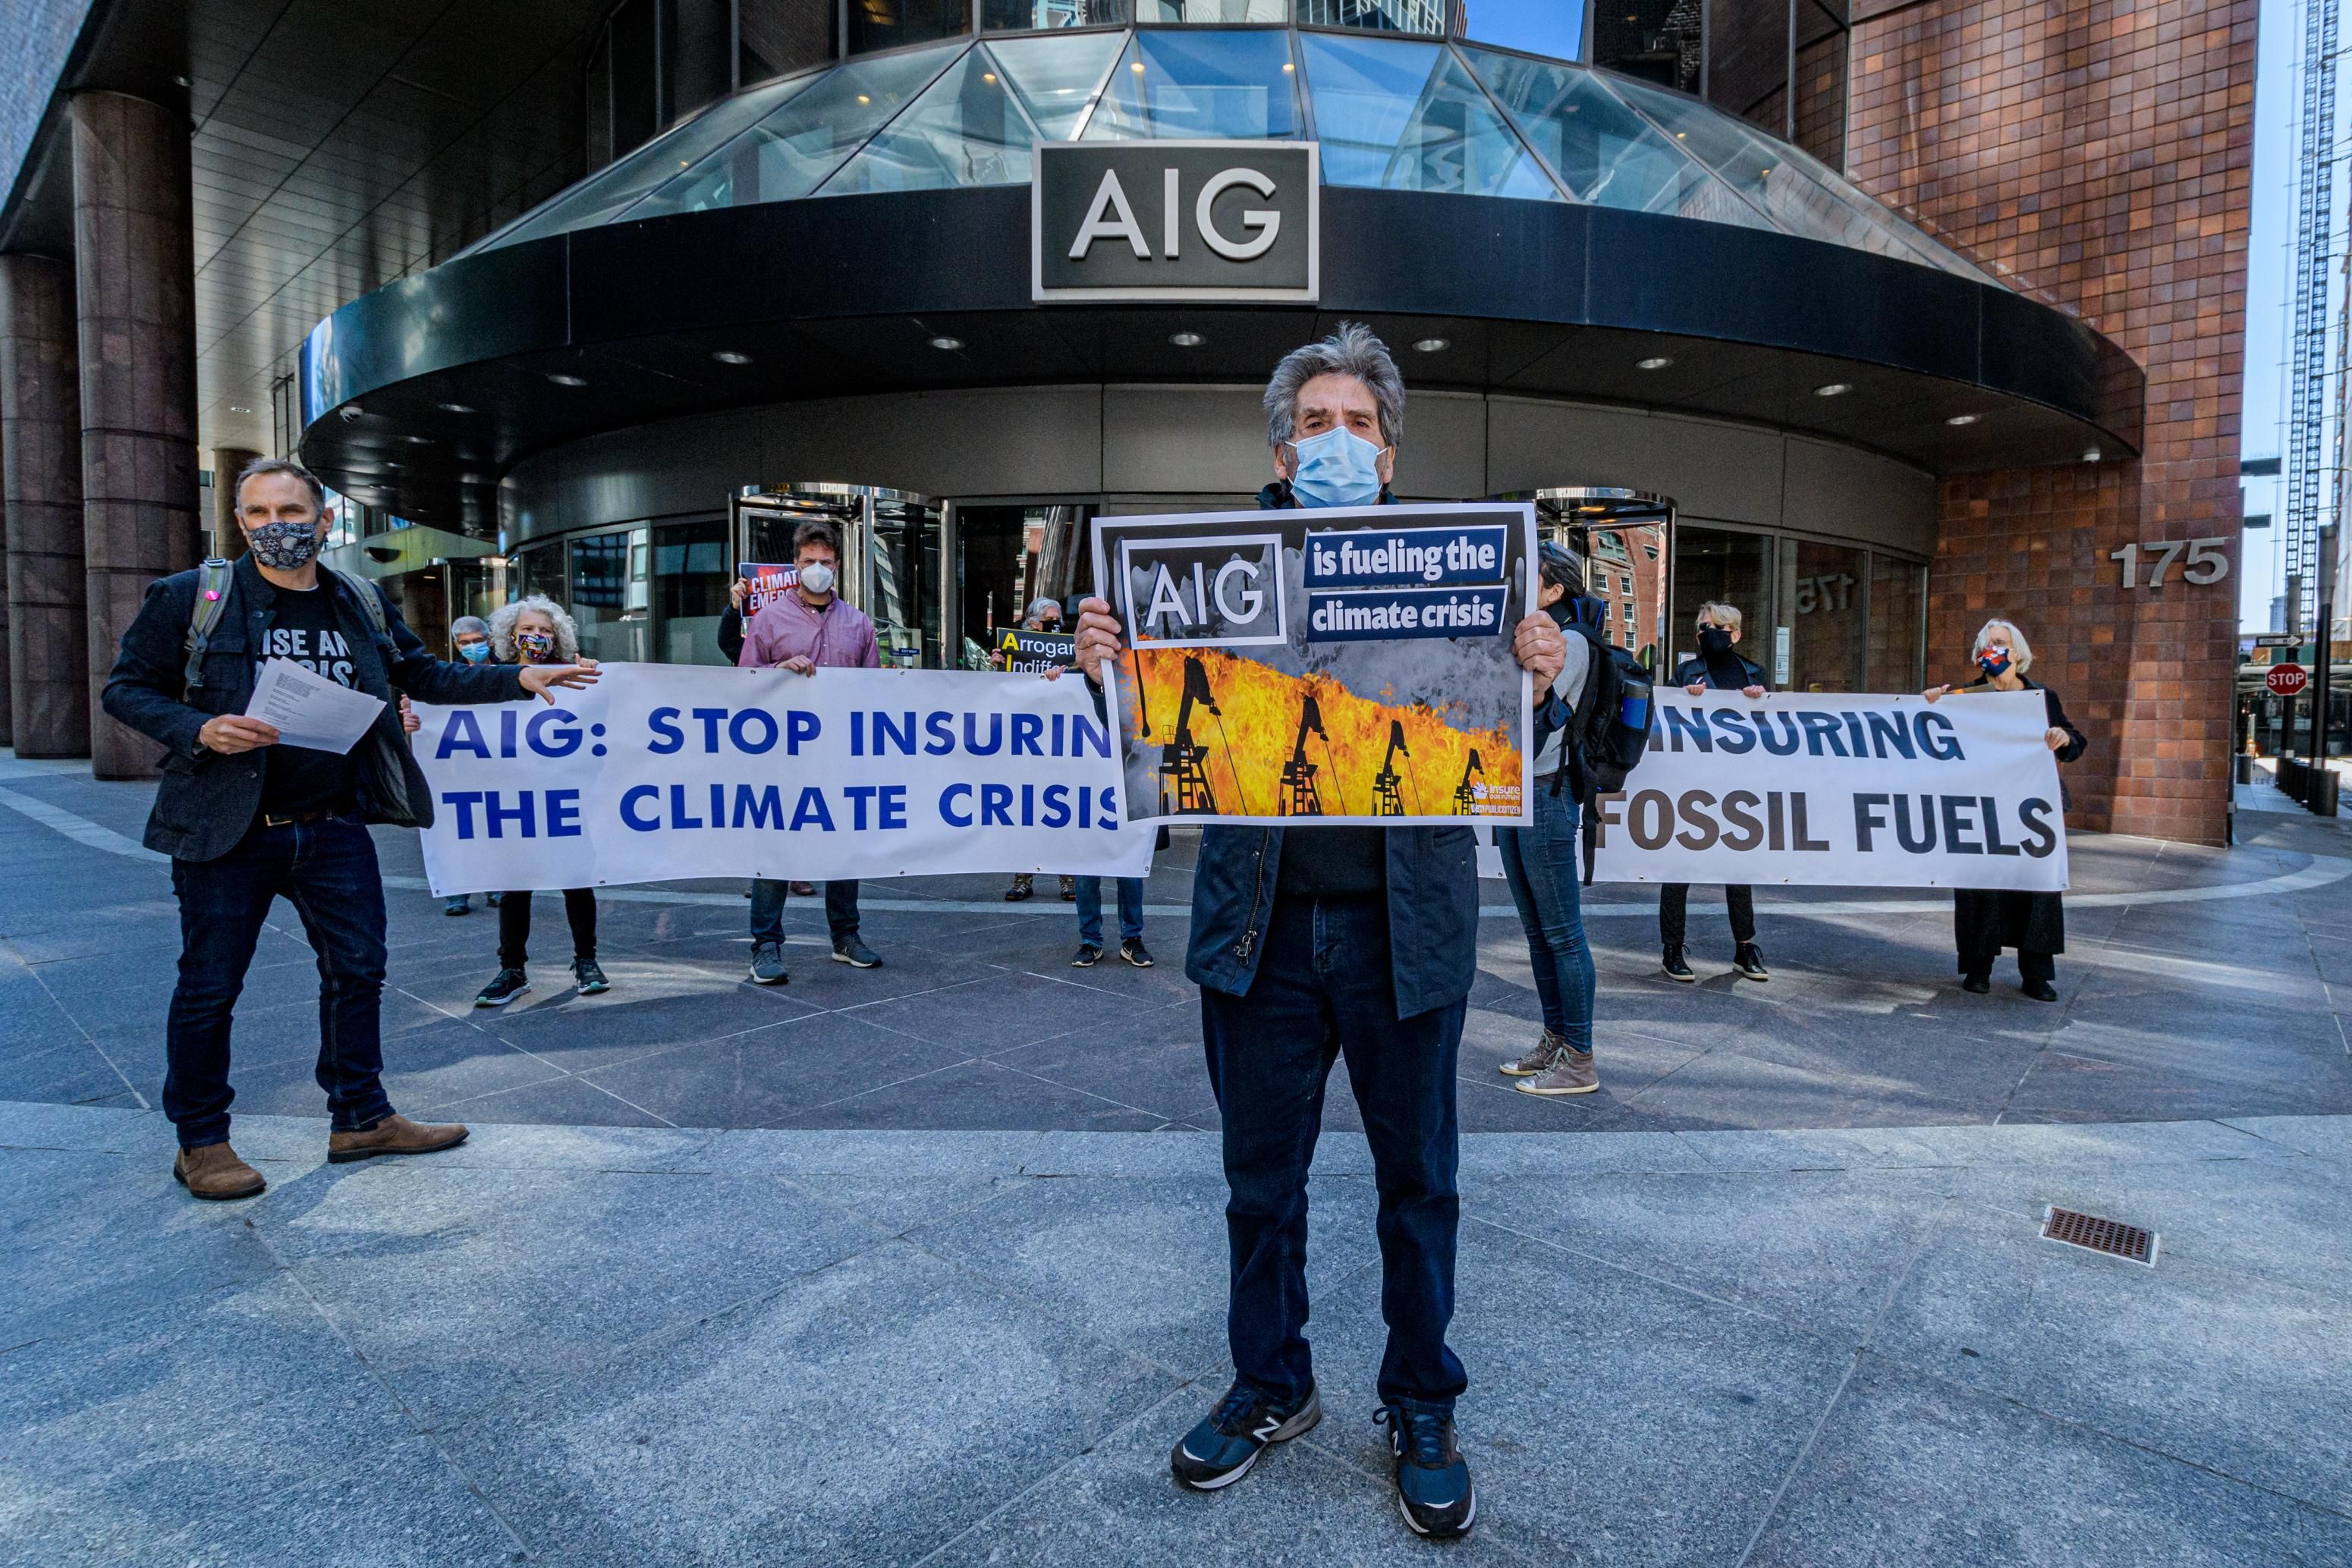 Activists with the Insure Our Future network gathered outside AIG Headquarters in Manhattan during their annual shareholders' meeting on May 12, 2021 to demand that AIG take action on climate change.